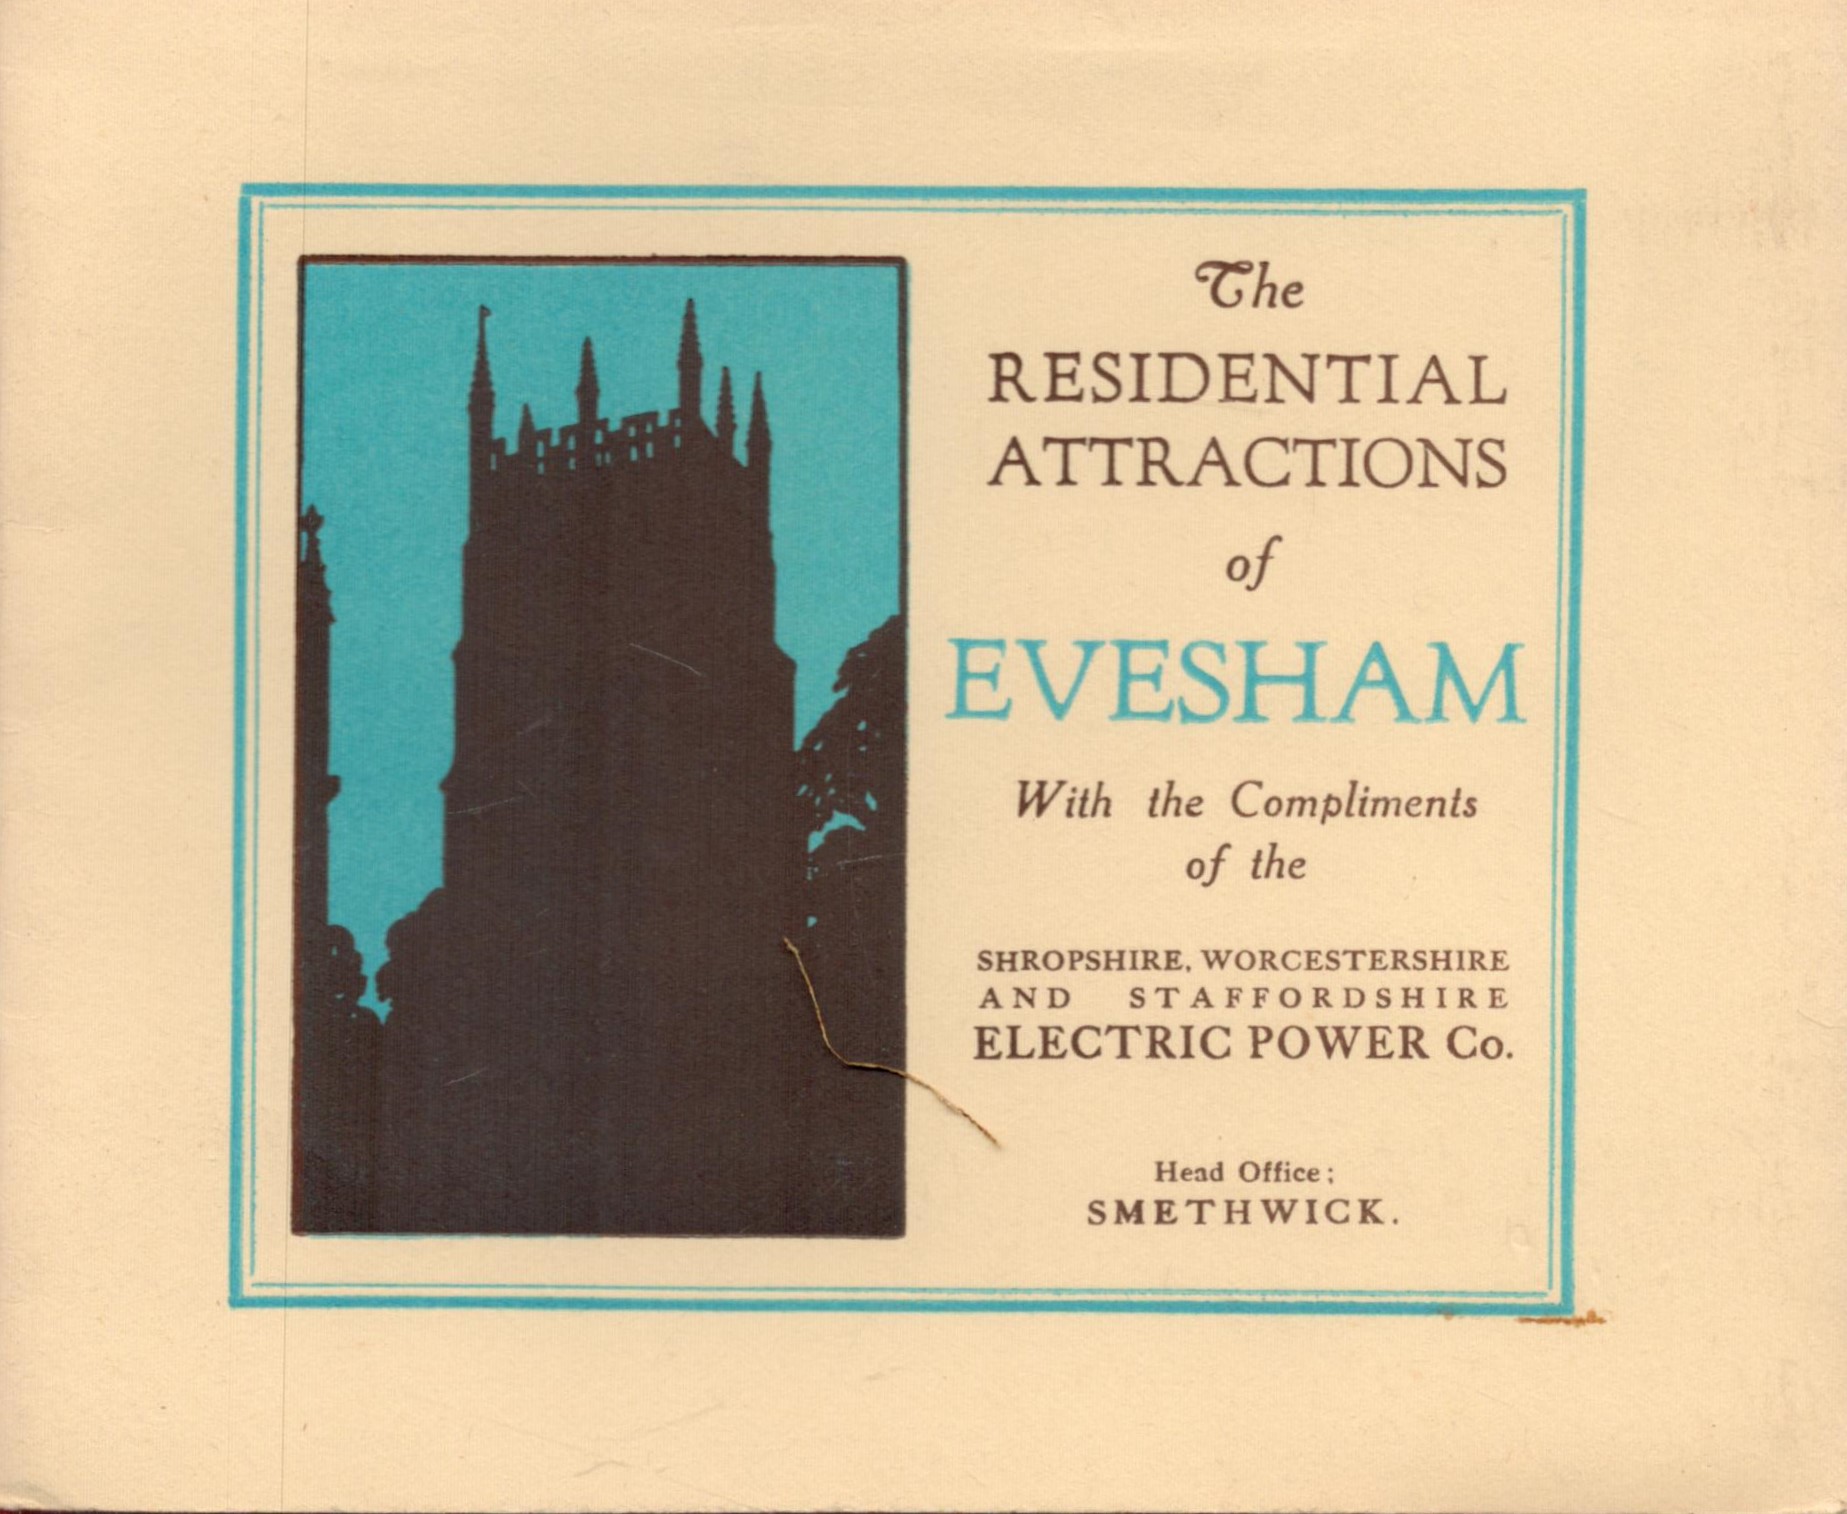 The Residential Attractions of Evesham. Compliments of the Shropshire, Worcestershire and